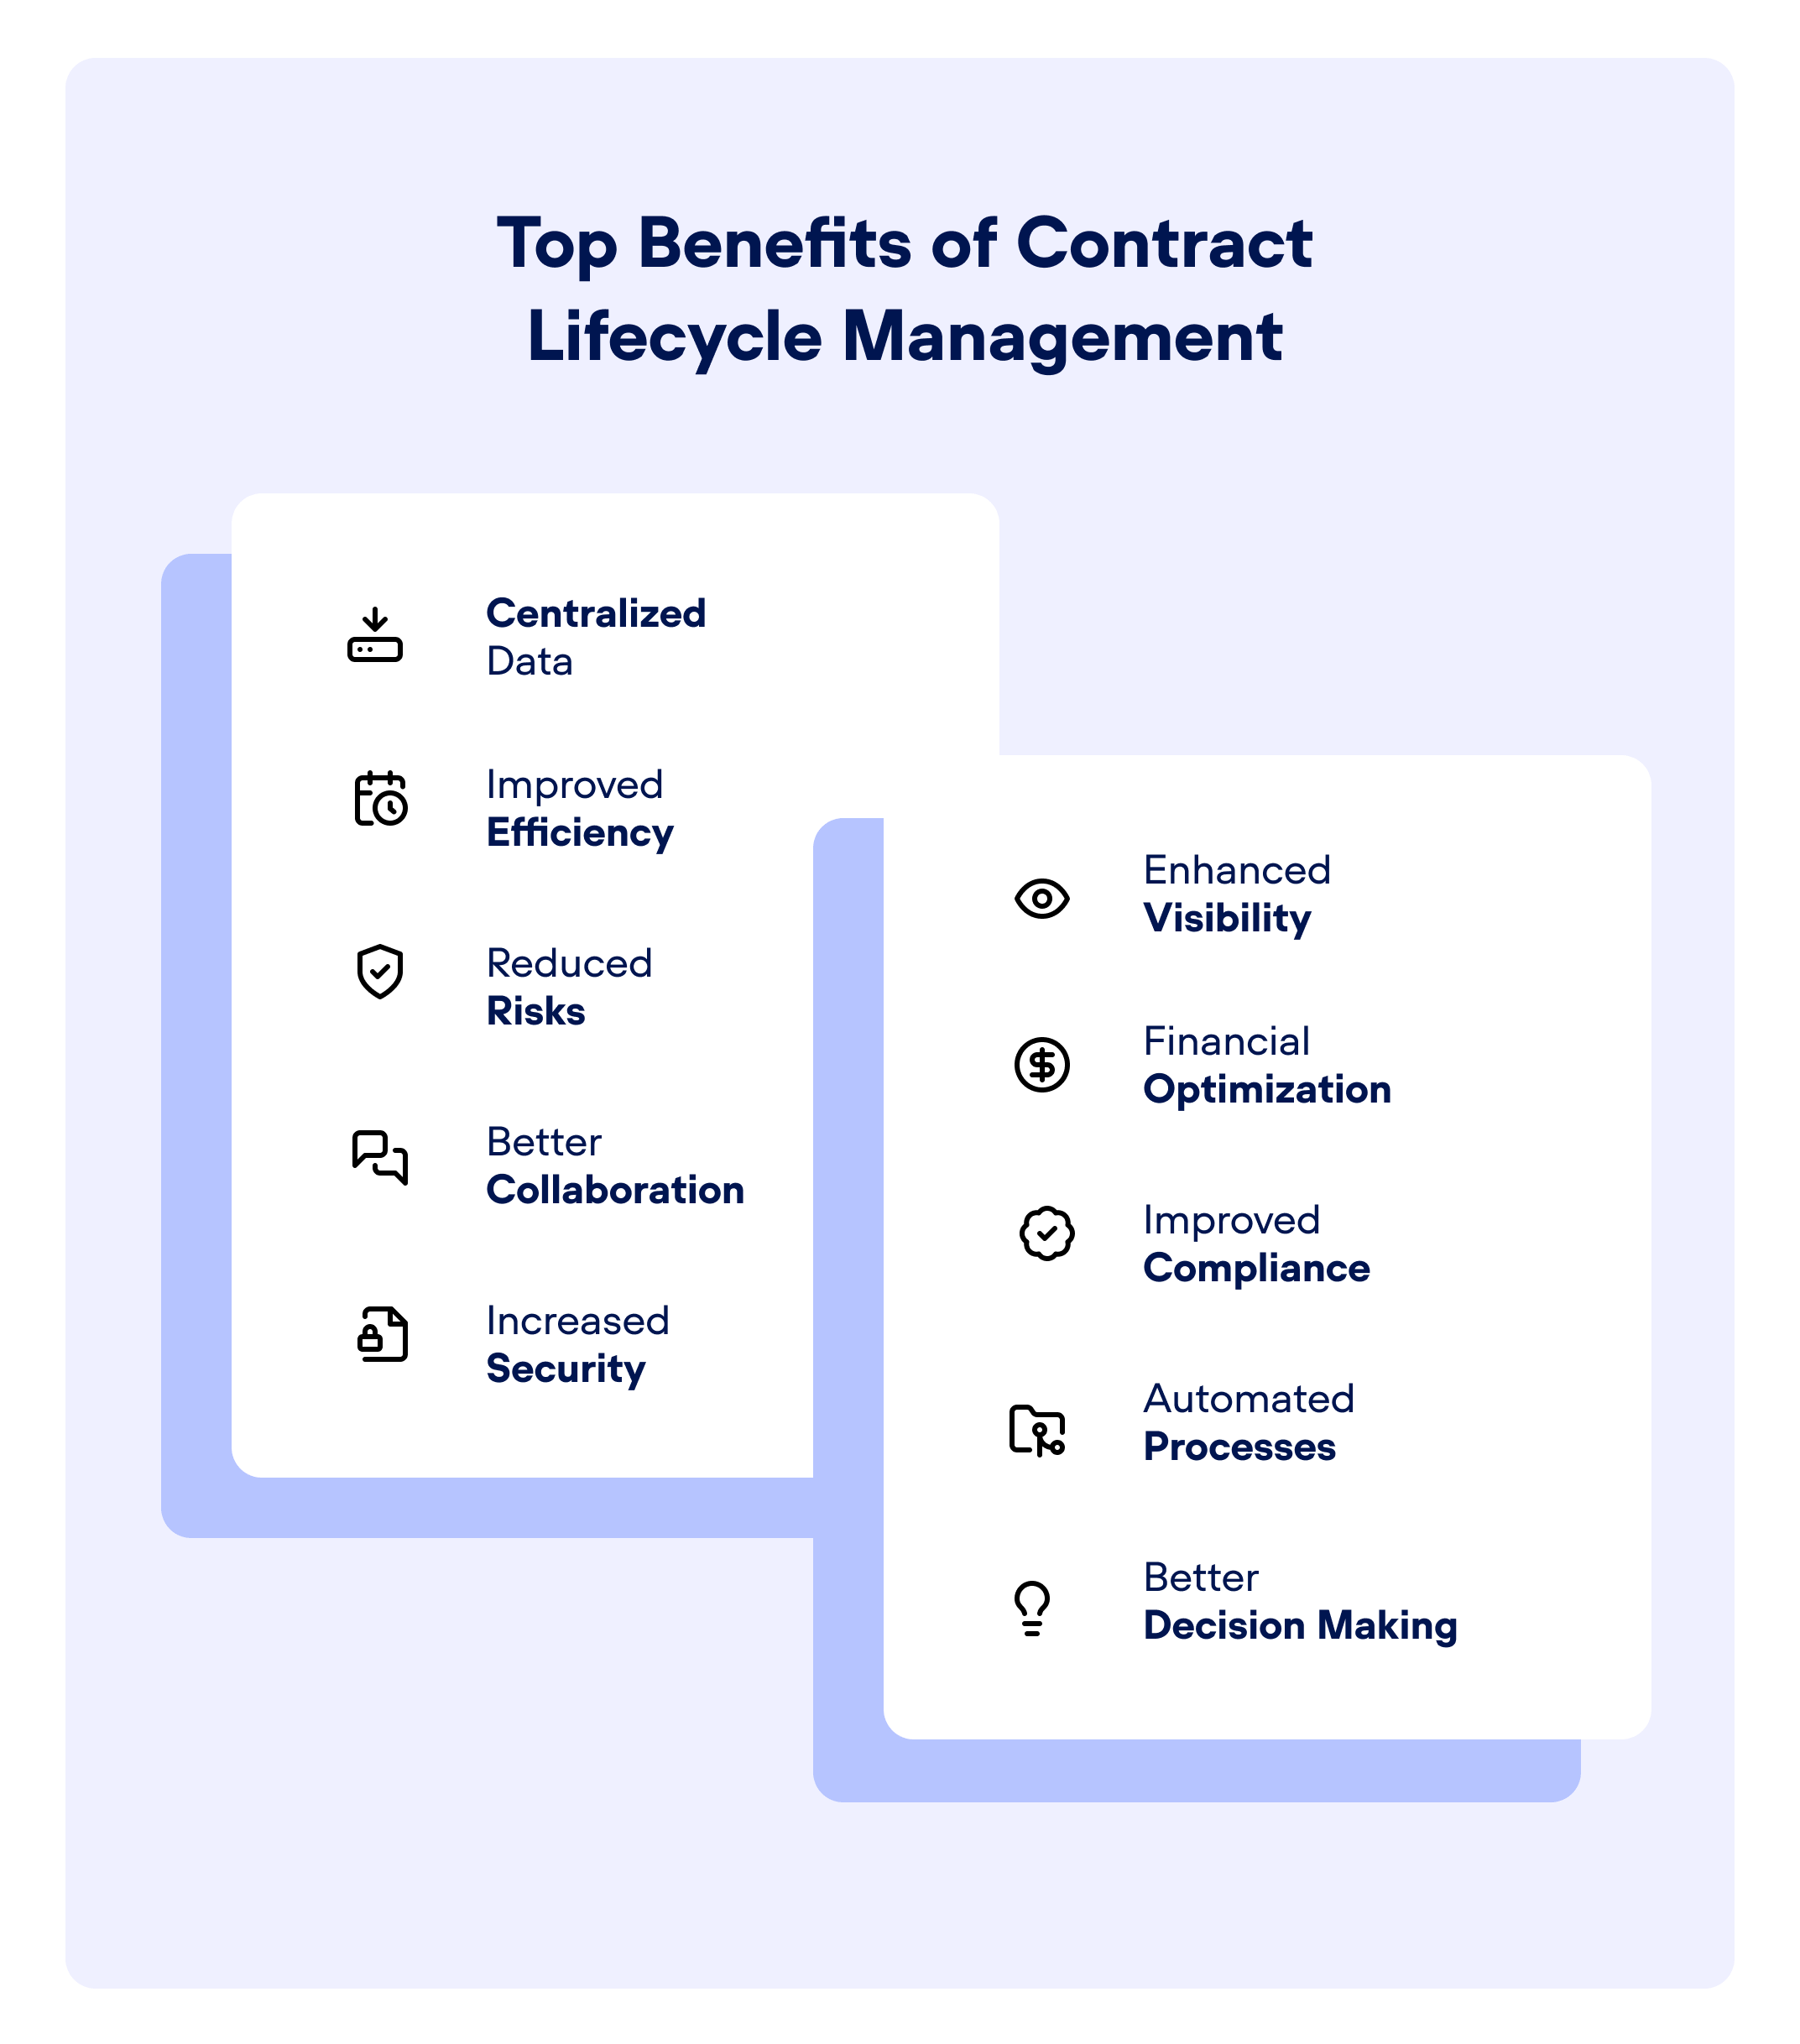 Infographic showcasing "the top 10 benefits of contract lifecycle management". The top 10 benefits of CLM include: Centralized Data, Improved Efficiency, Reduced Risks, Better Collaboration, Increased Security, Enhanced Visibility, Financial Optimization, Improved Compliance, Automated Processes, Better Decision Making